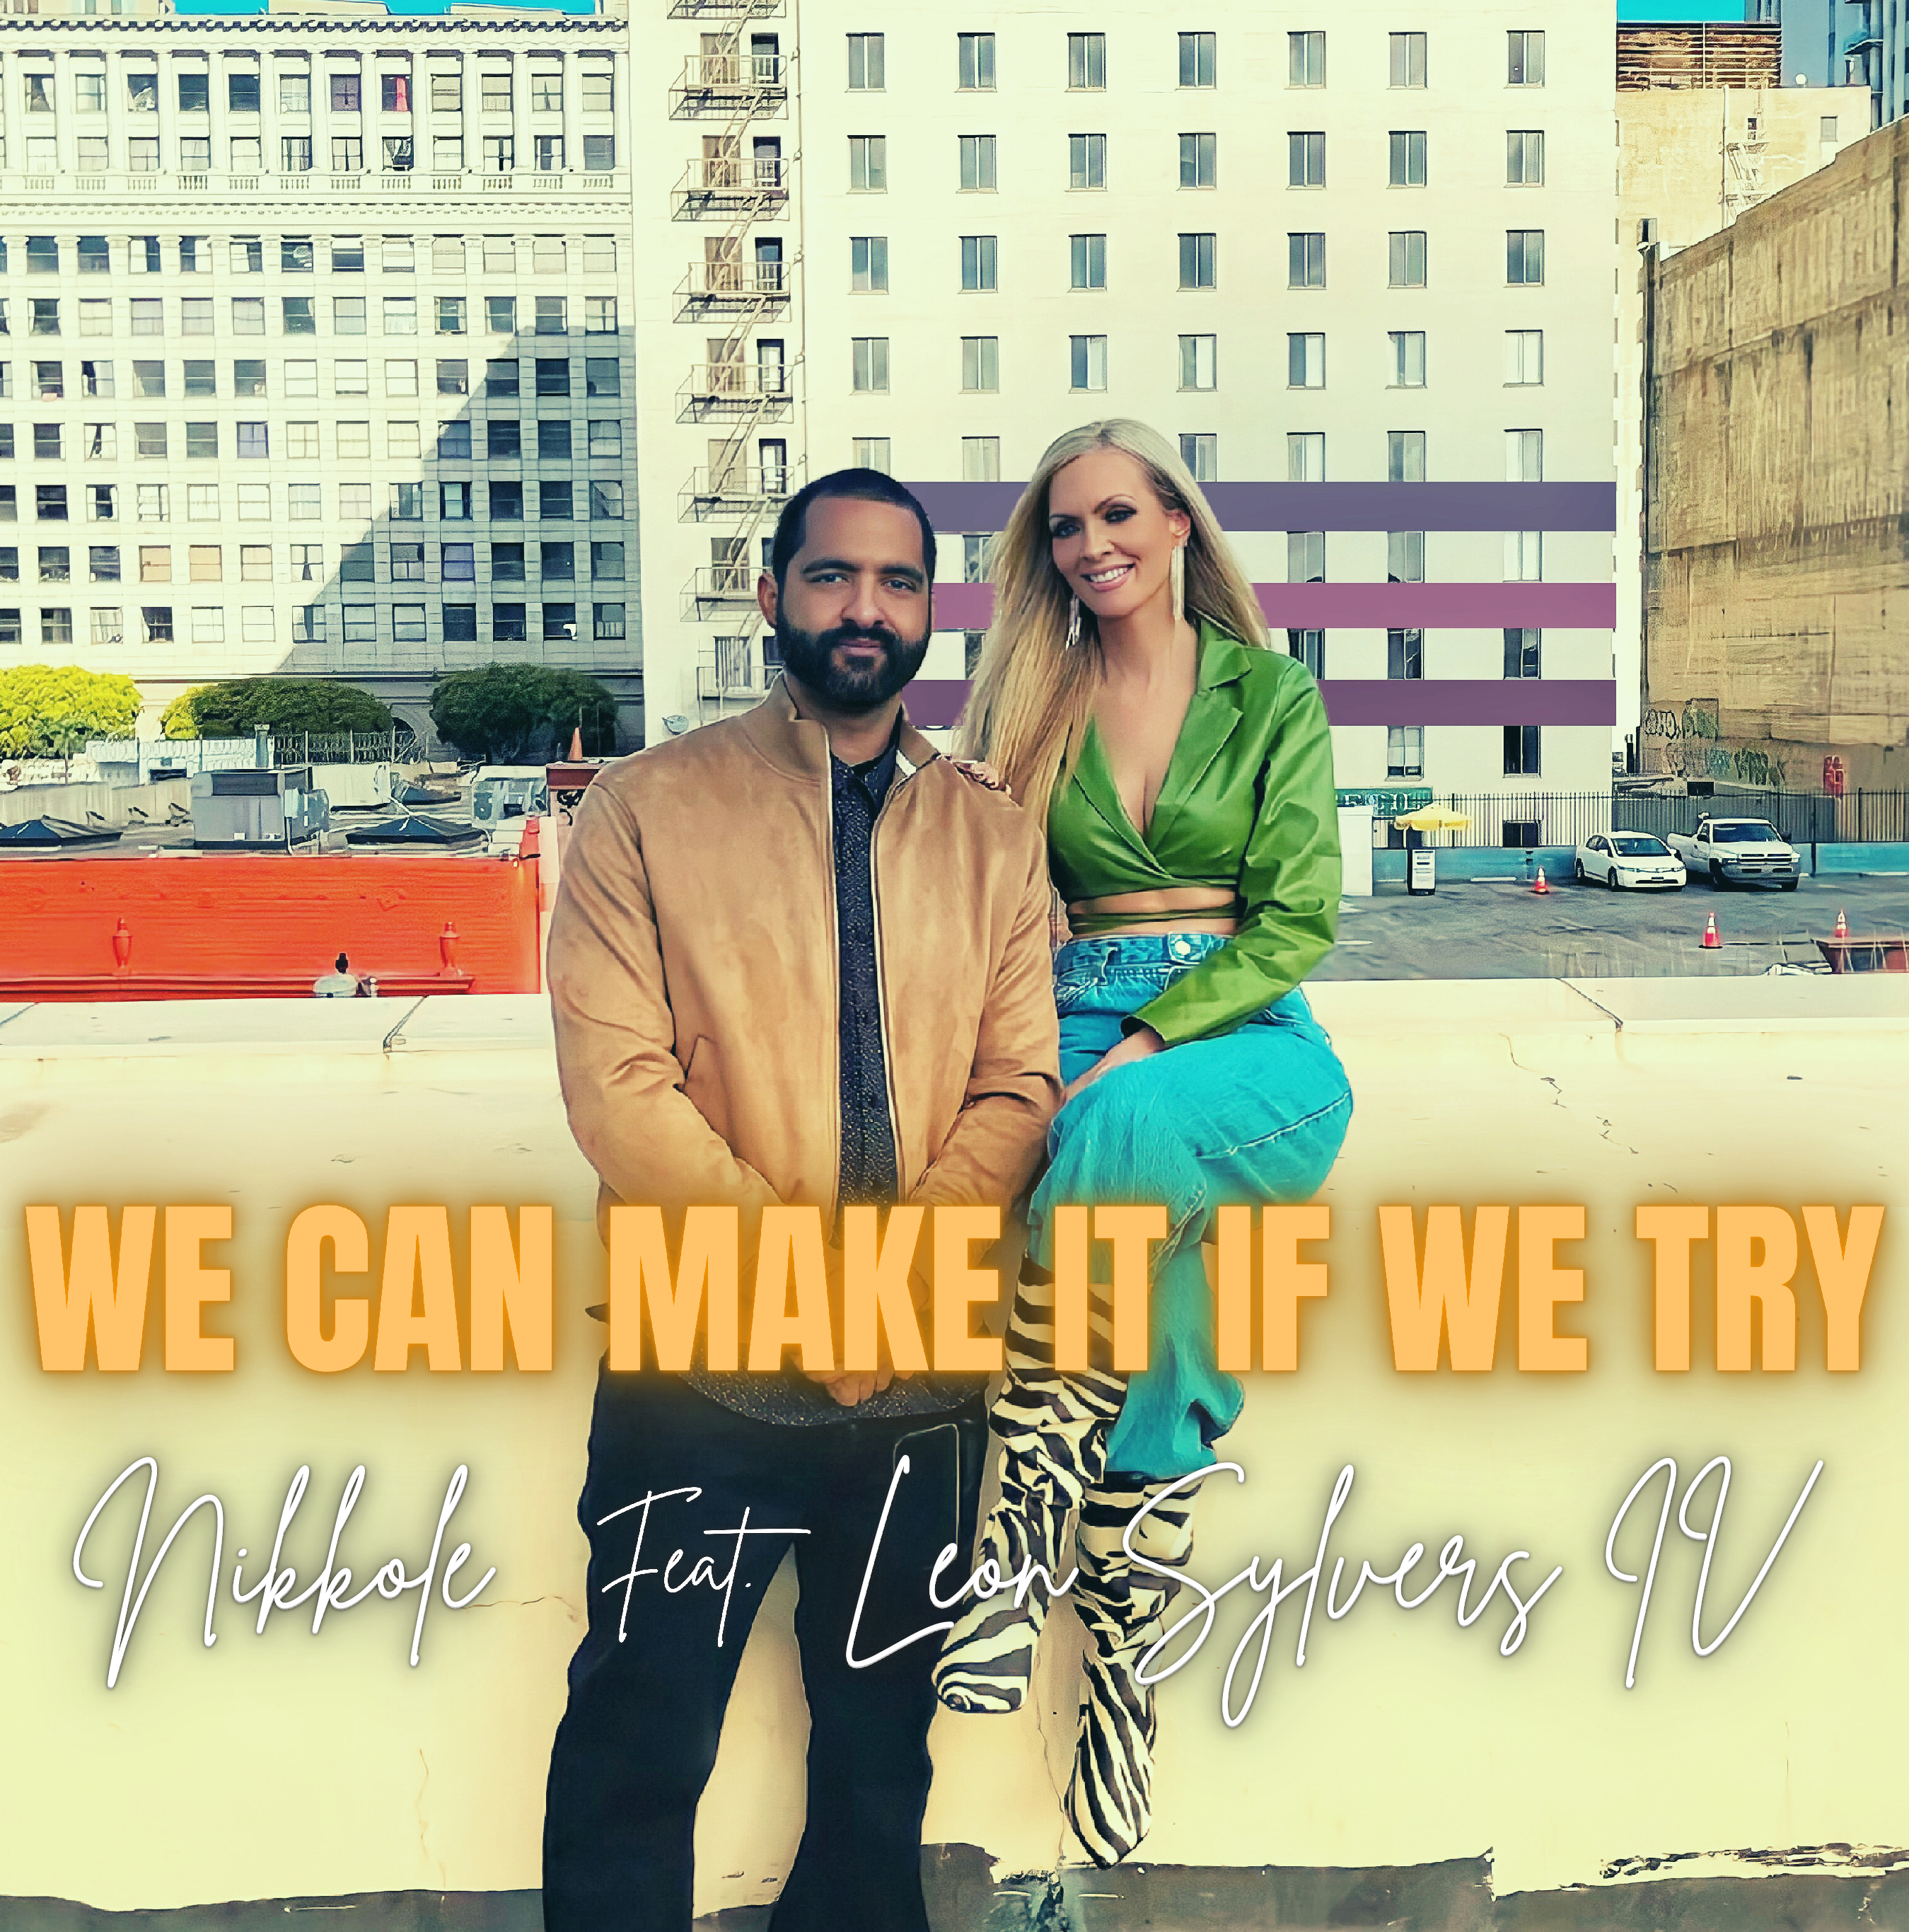 New Music Video Out Now for ‘We Can Make It If We Try”